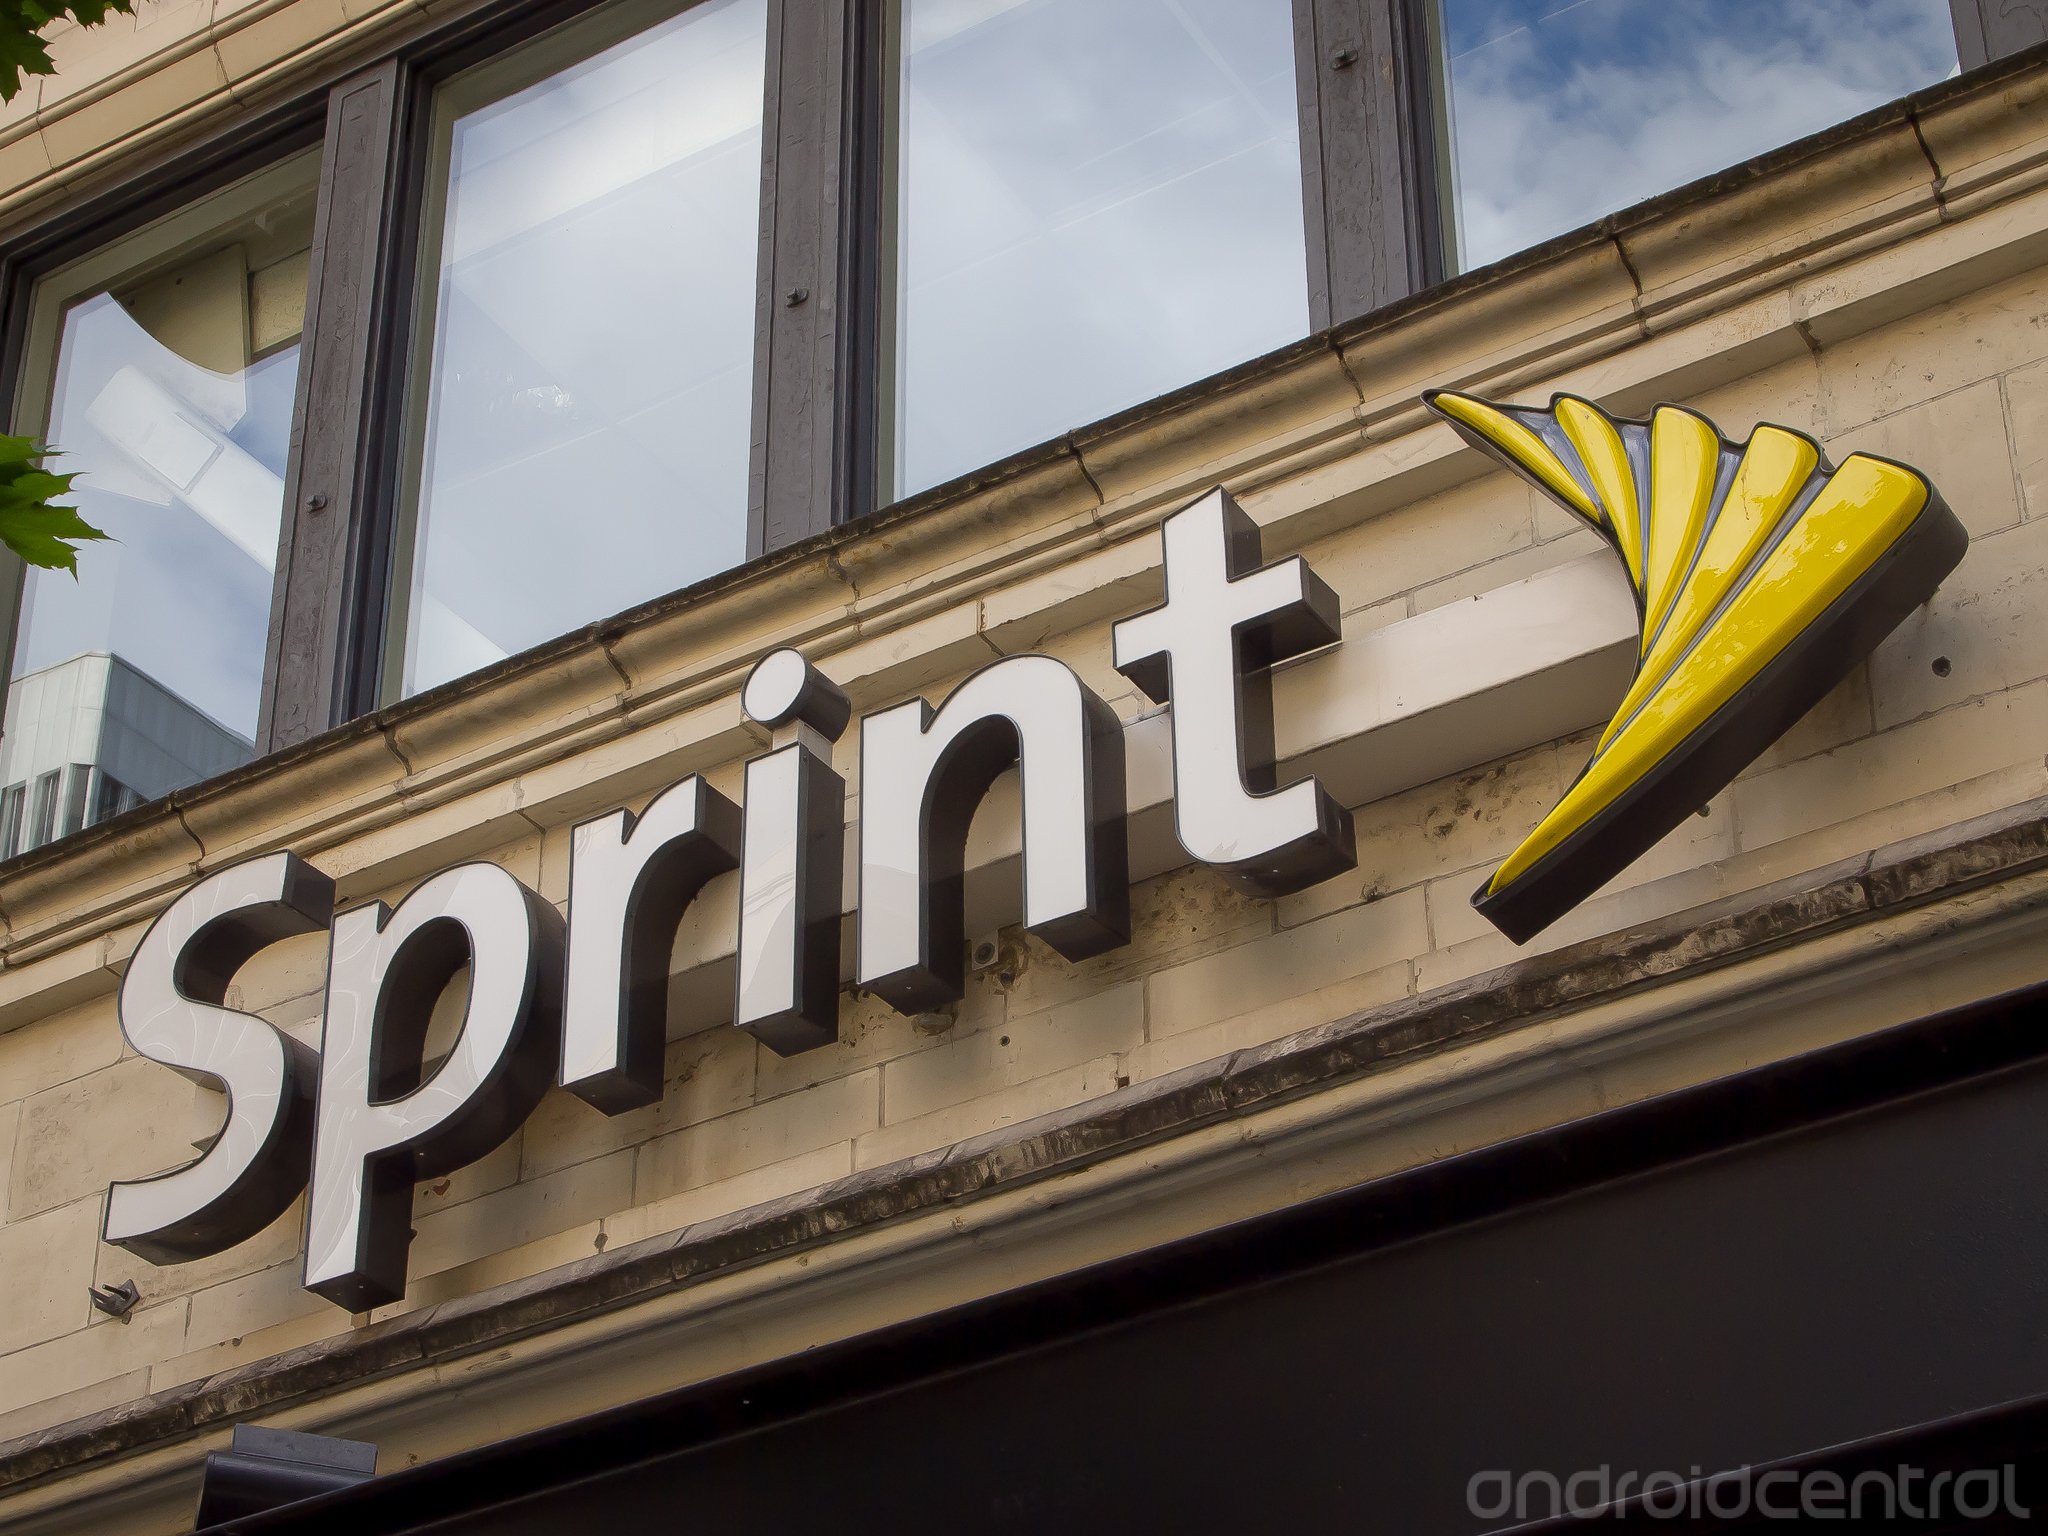 Sprint kills 2-year contracts for smartphones